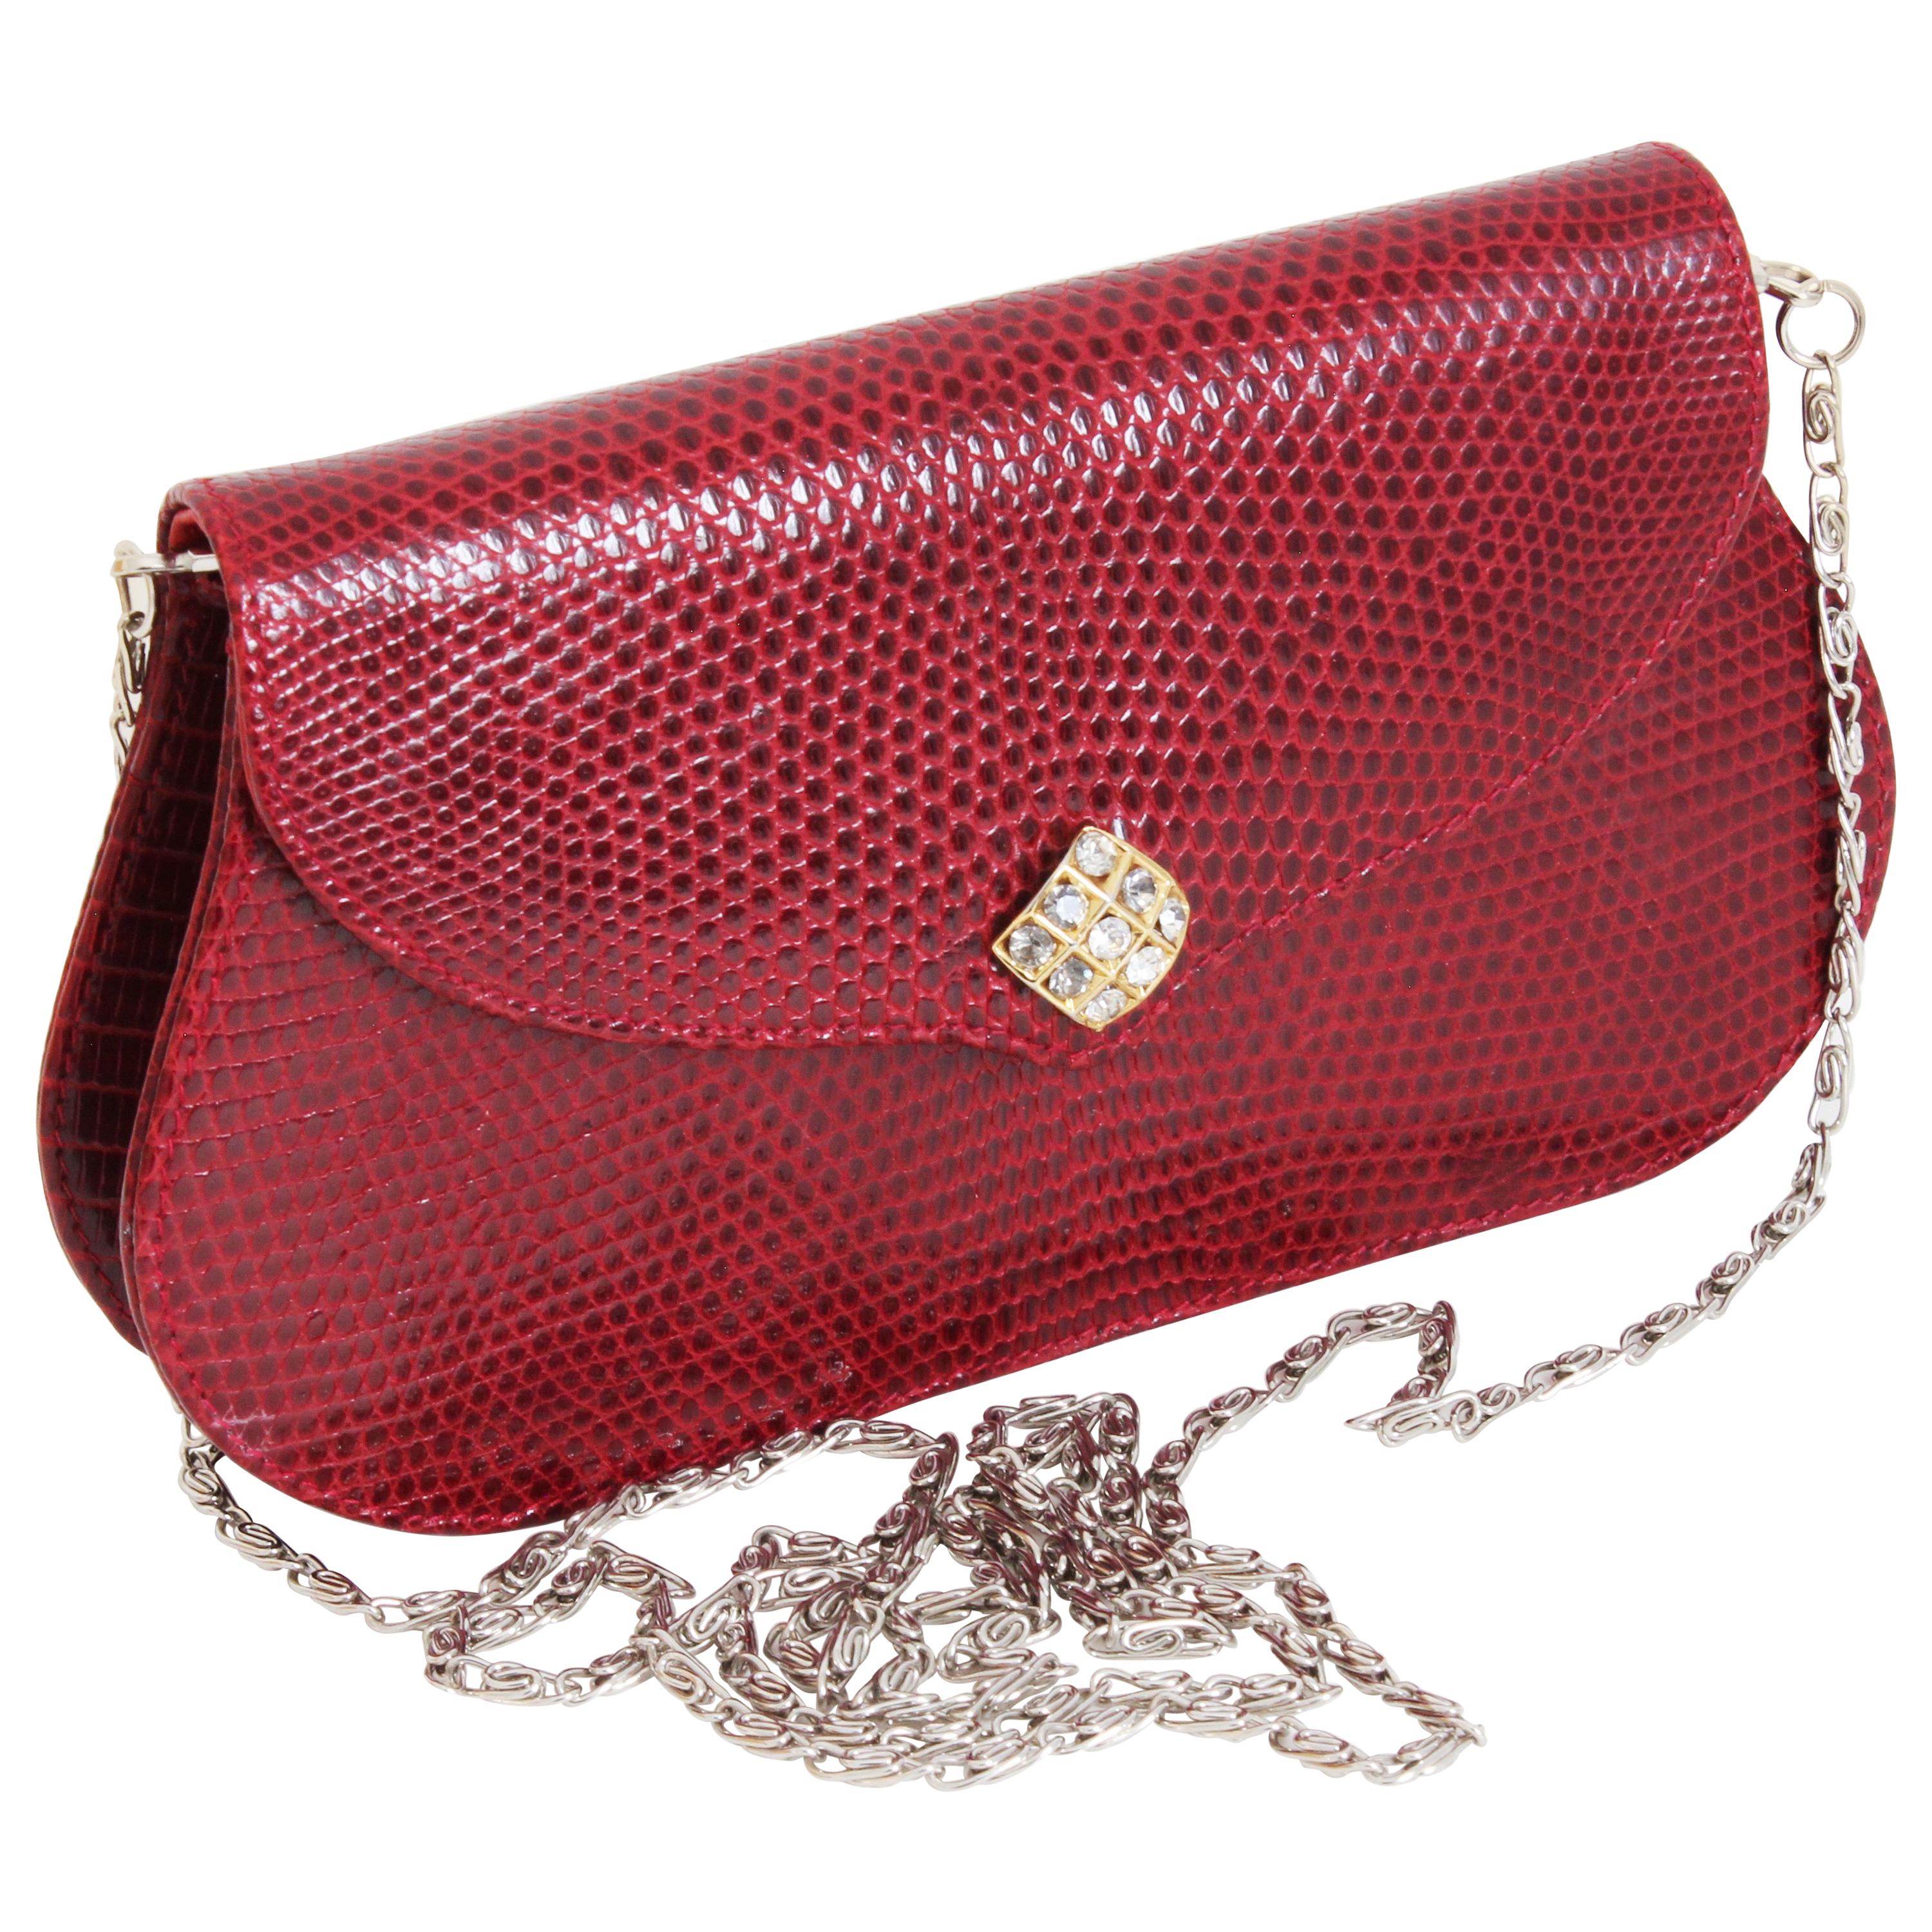 Lana of London Evening Bag Red Lizard Clutch with Chain 